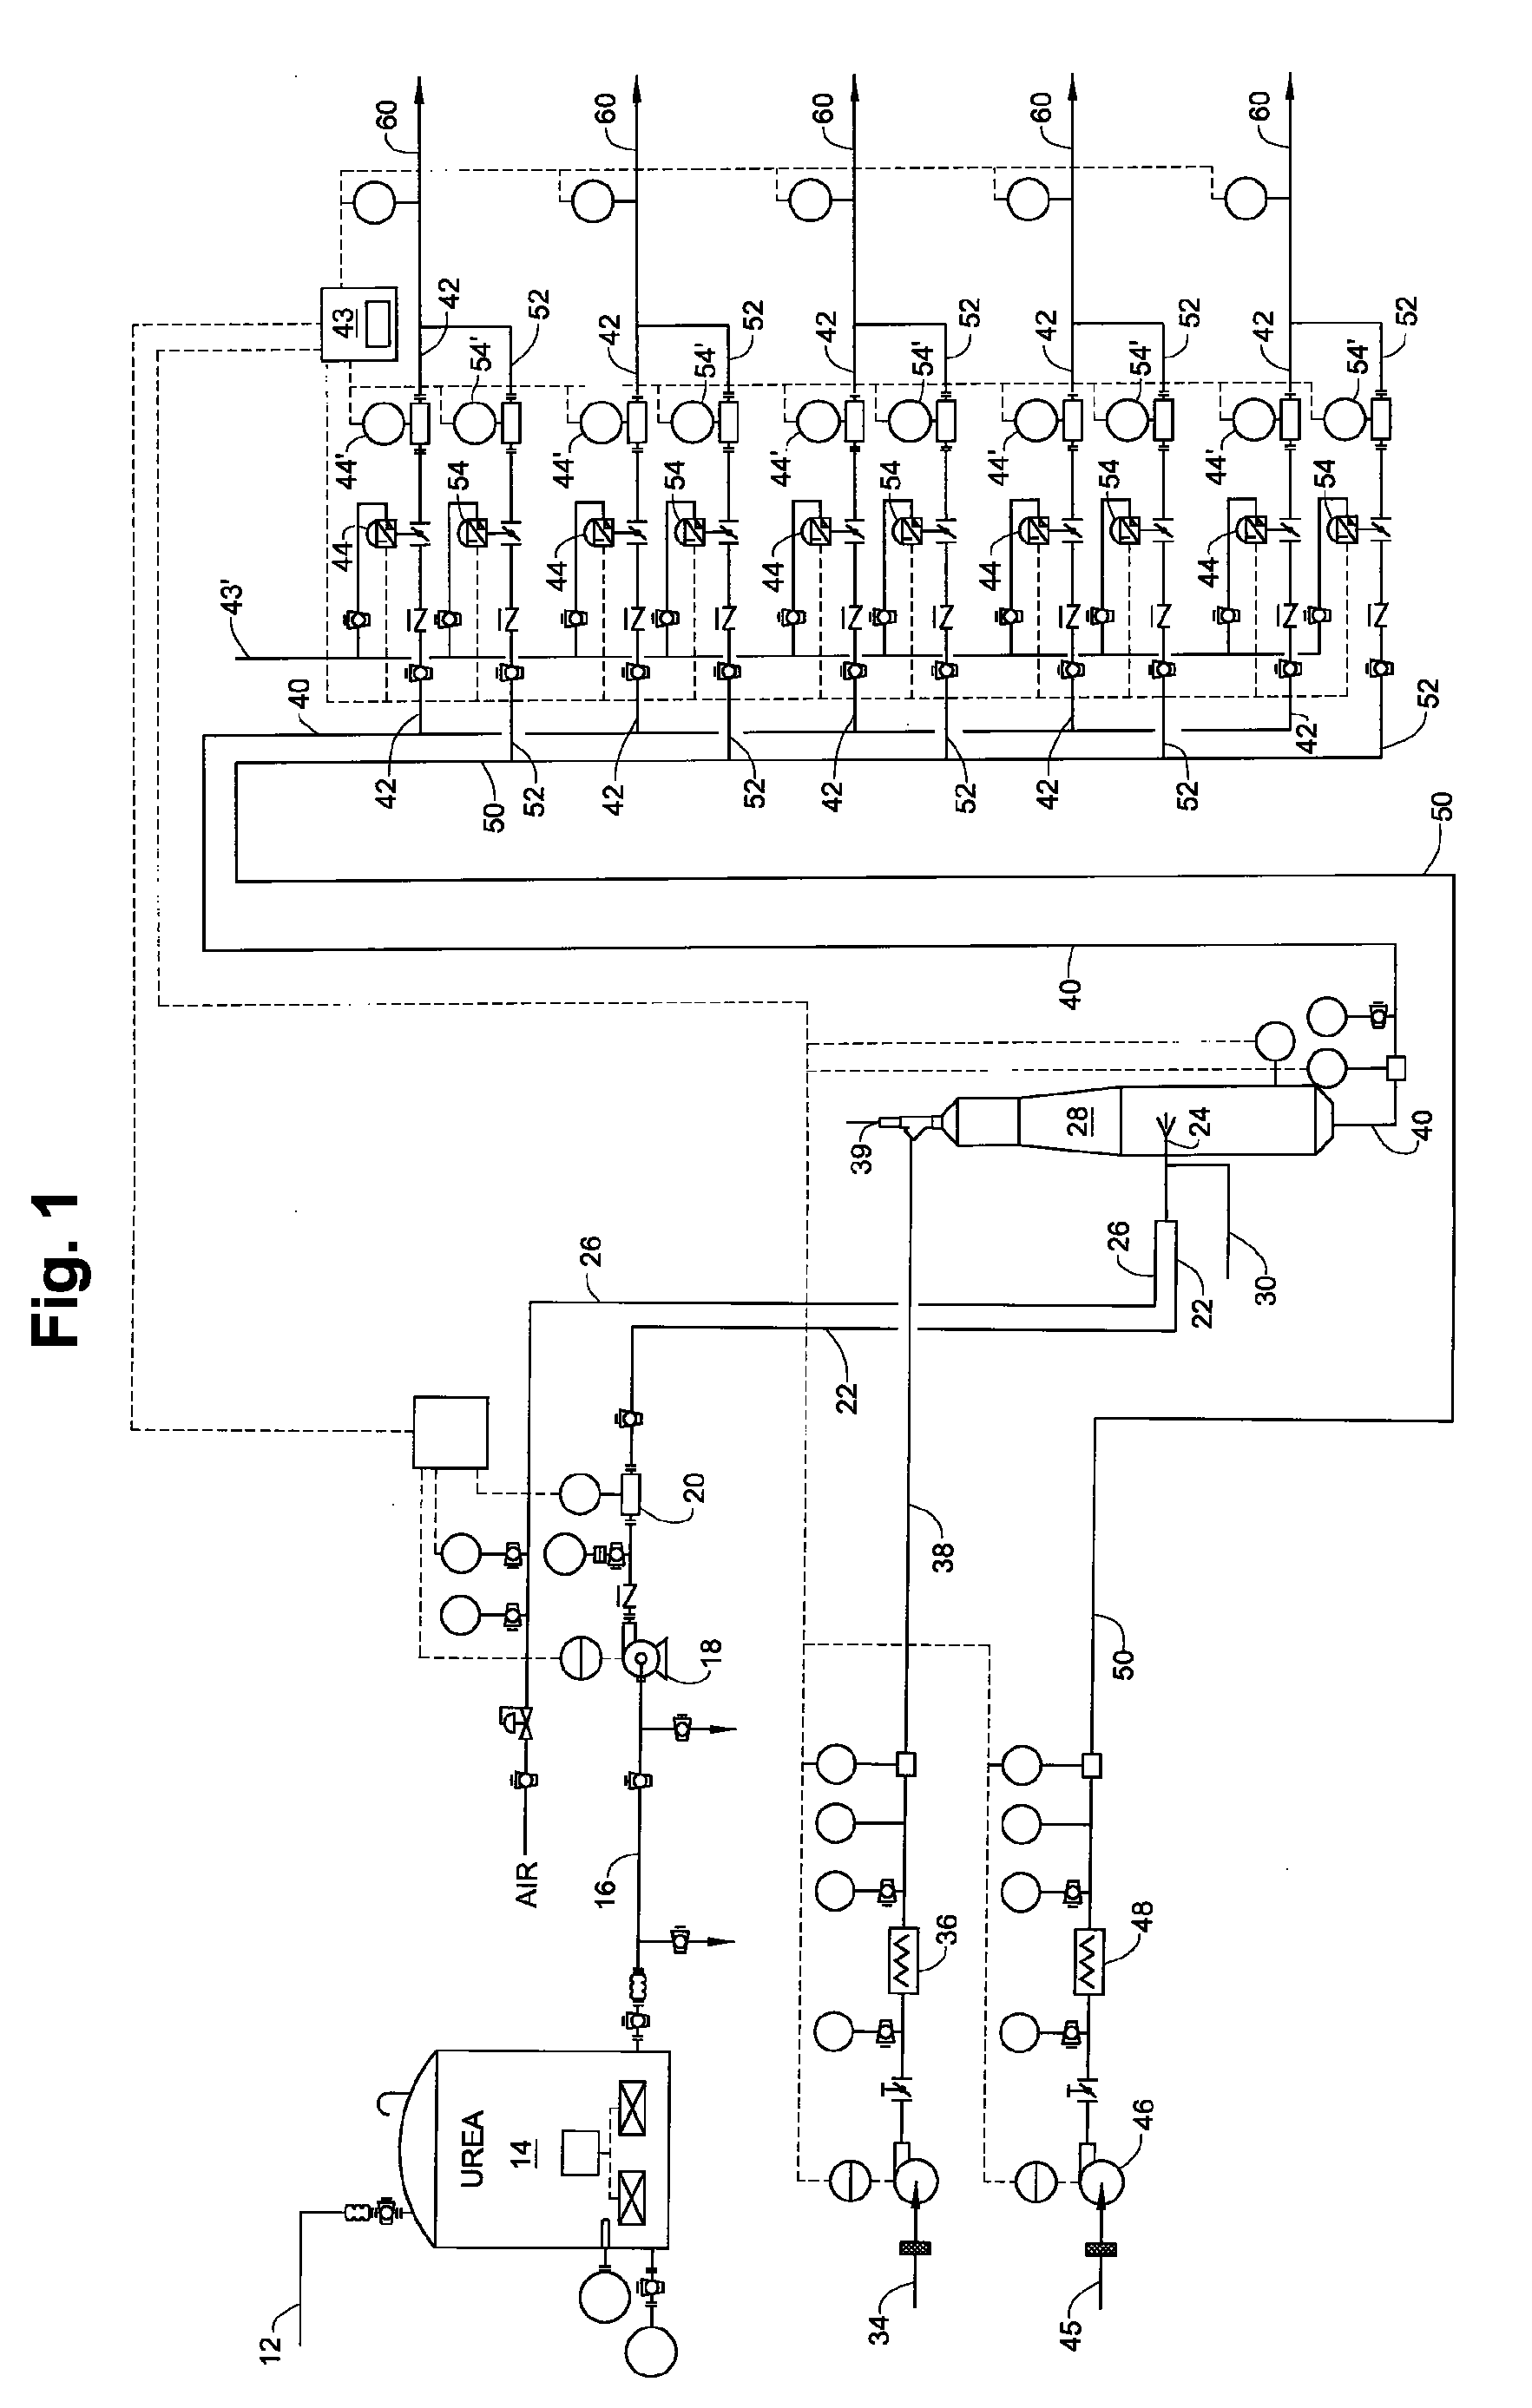 Selective catalytic NOx reduction process and control system